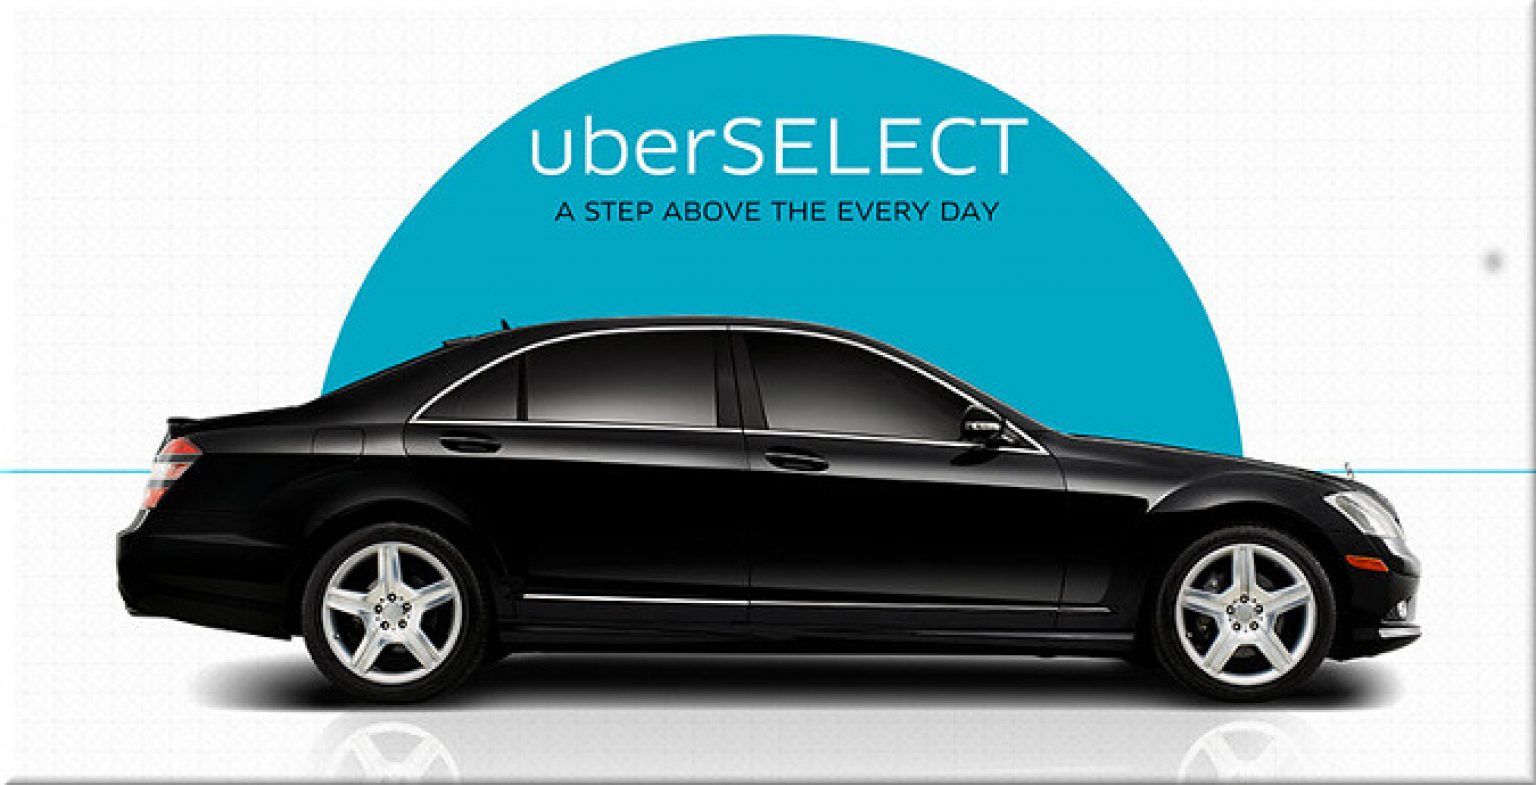 Uber Car Types Simply Explained (With Photos)